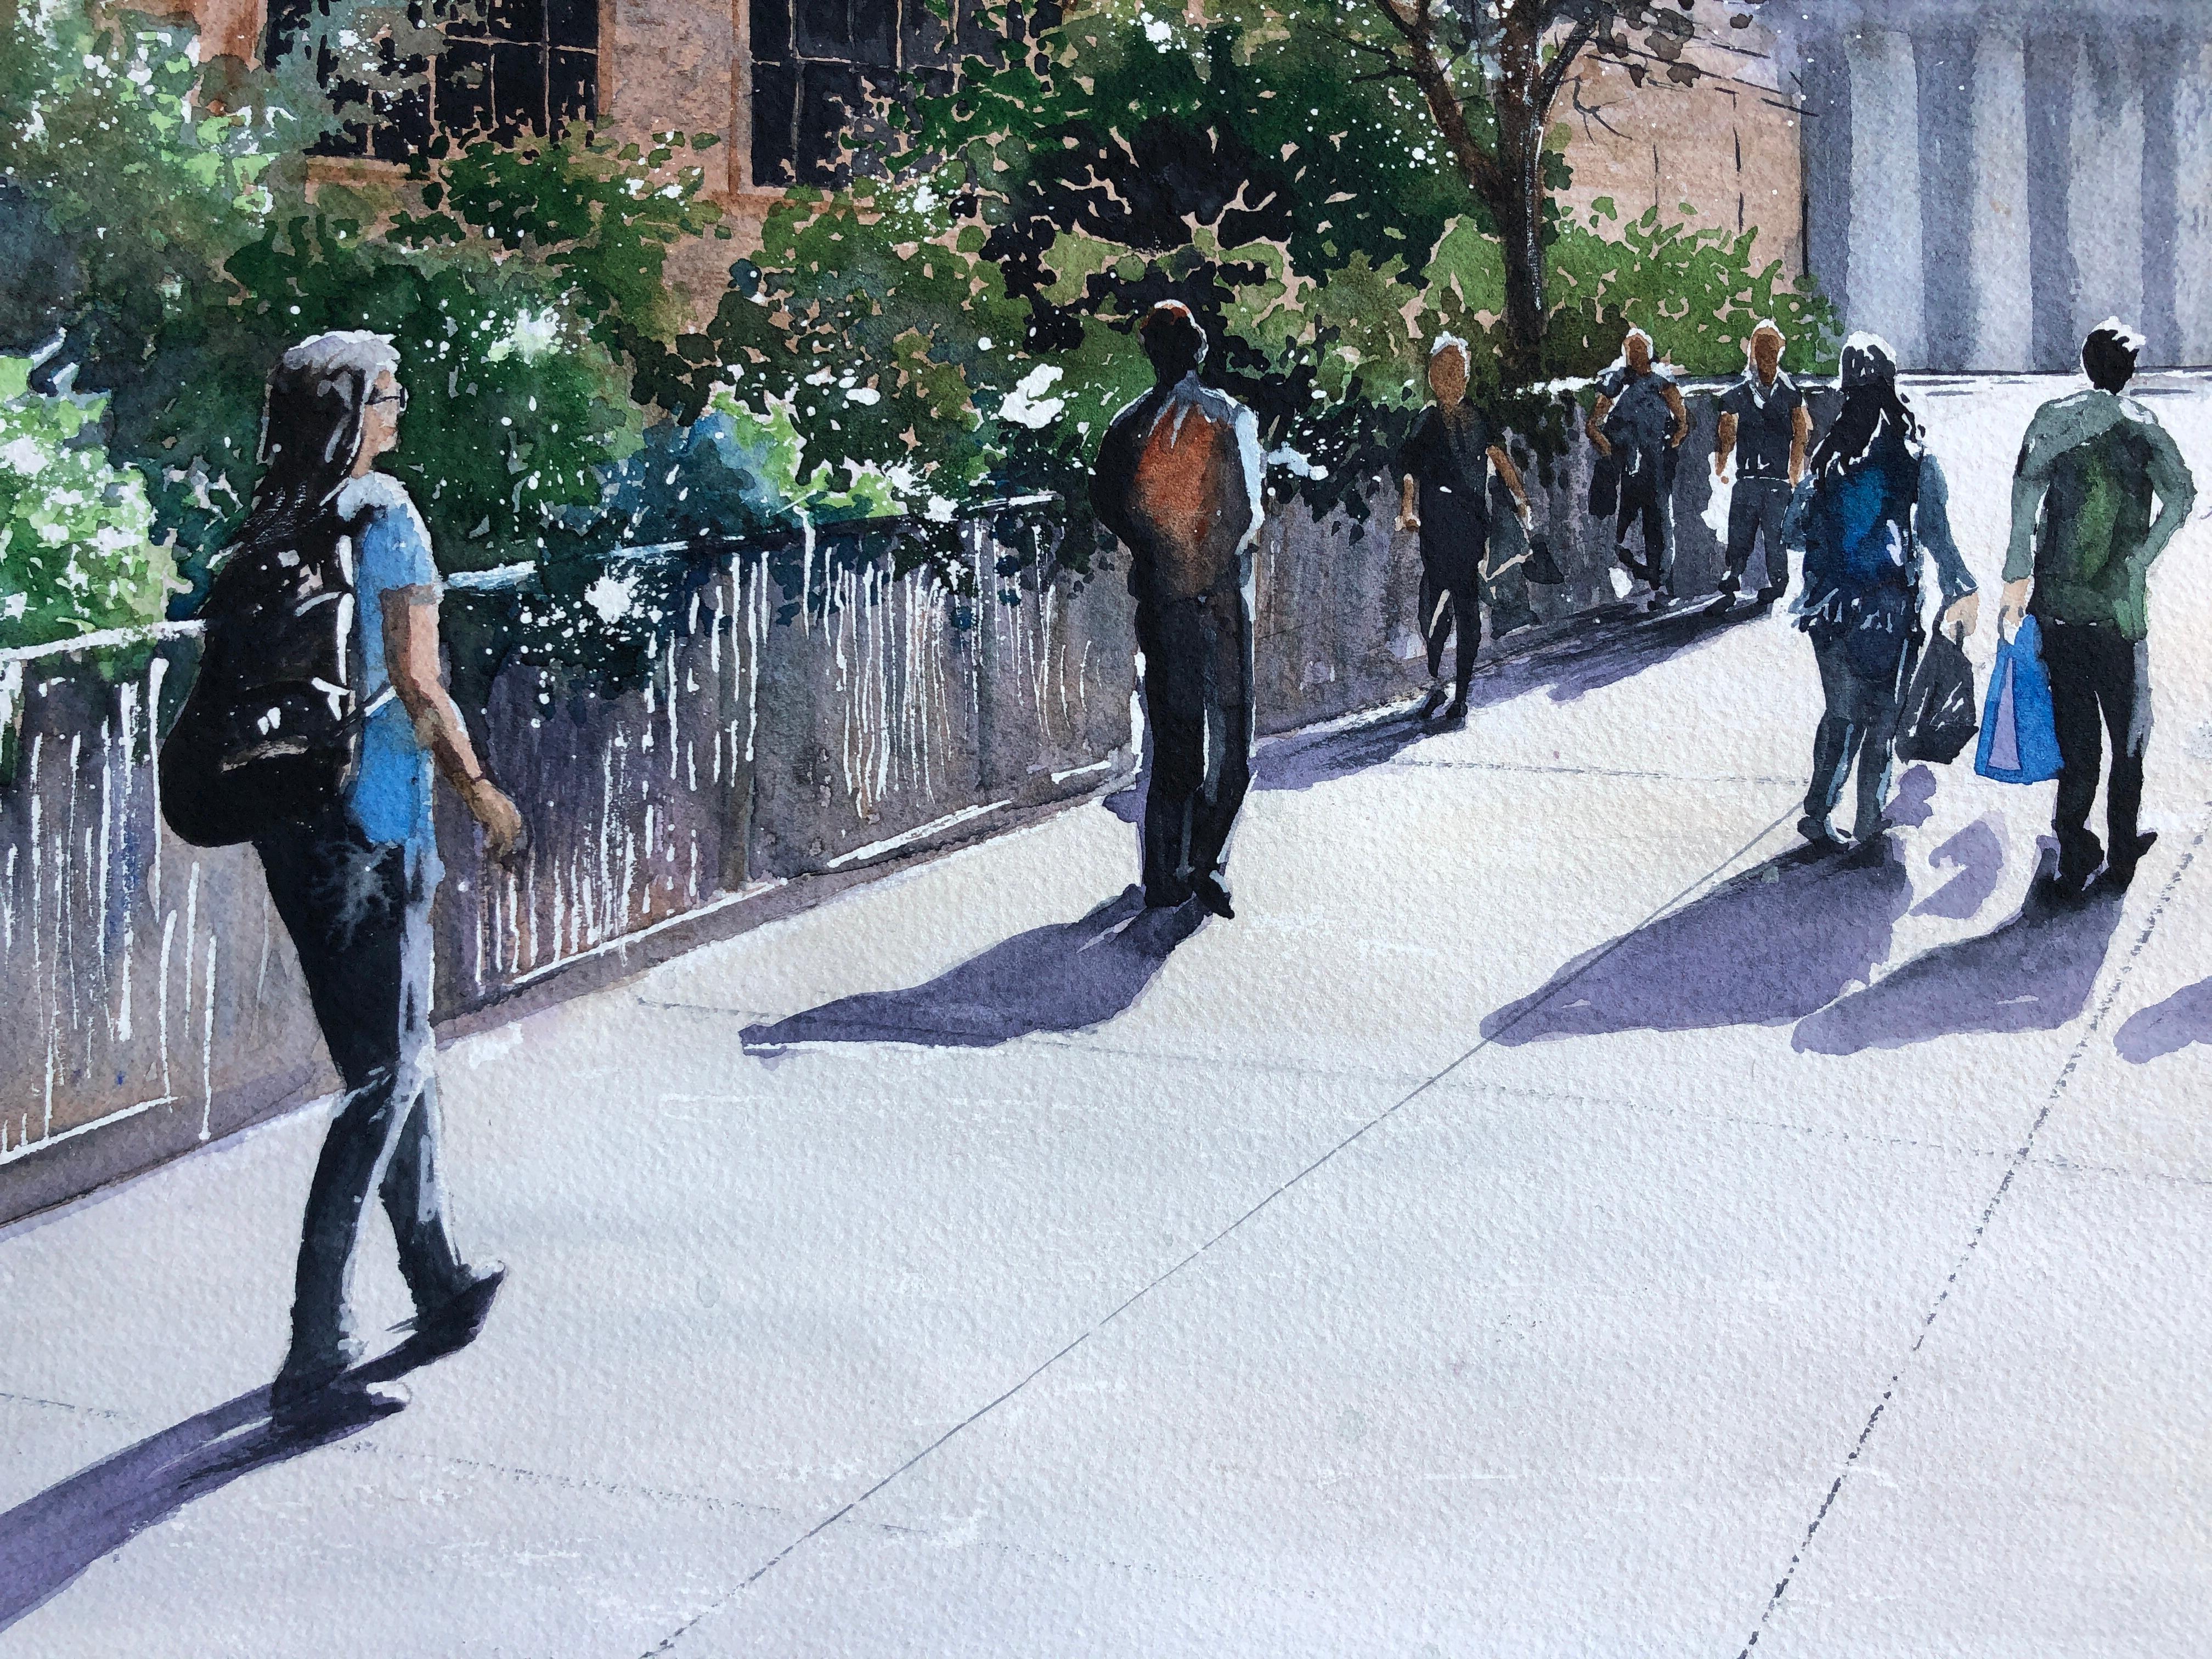 <p>Artist Comments<br>Artist Maurice Dionne paints an urban scene of people walking along the pavement. The piece captures the movement of the crowd of the downtown market loaded with packages. 